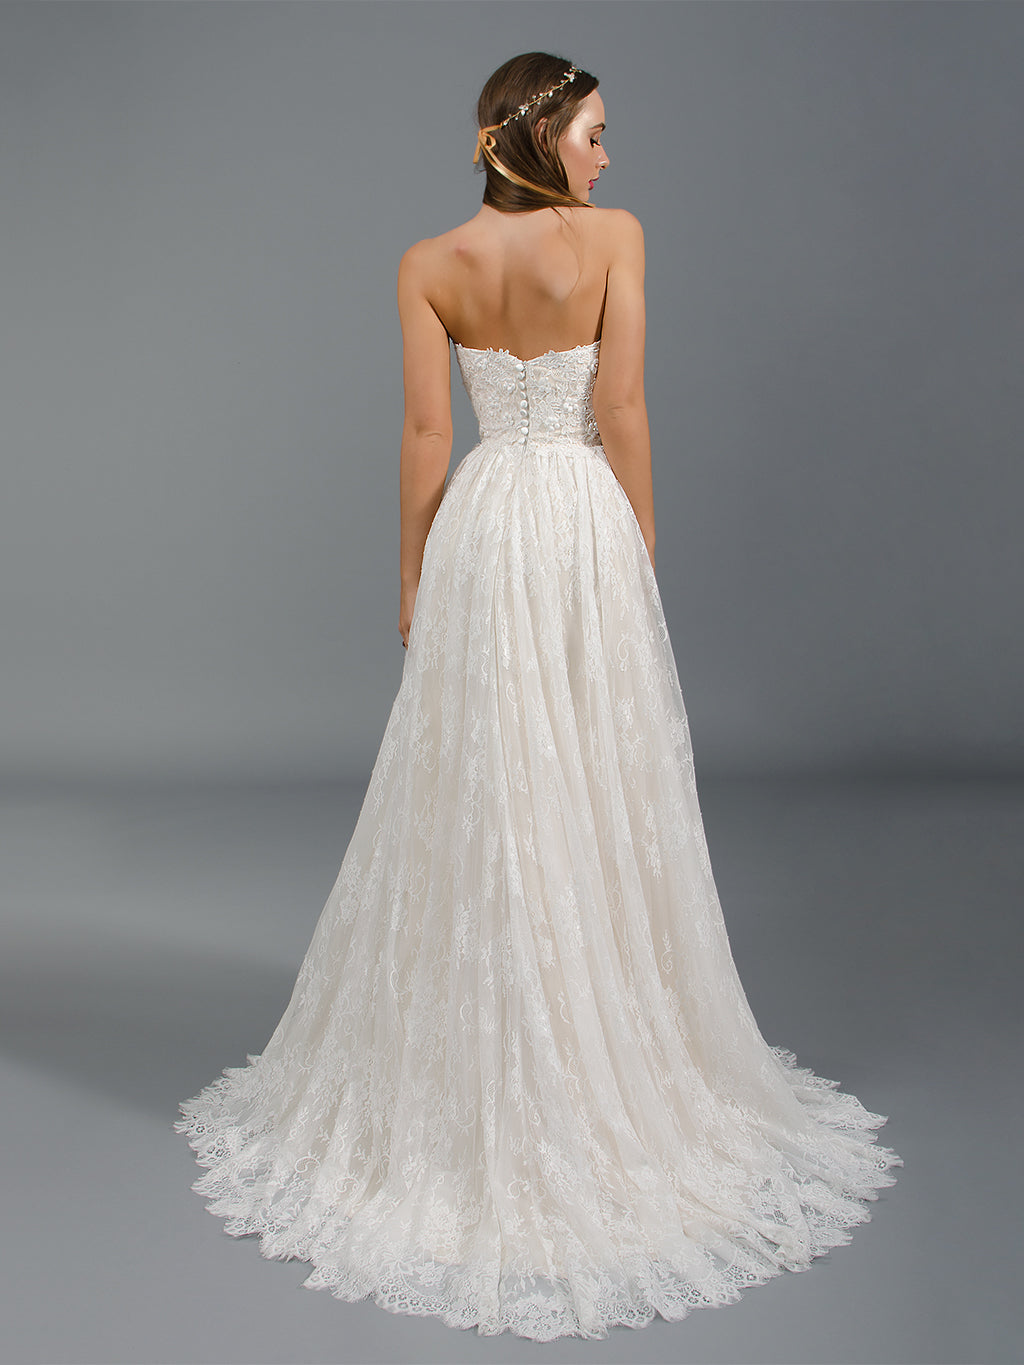 Strapless lace wedding dress with allover lace 4043